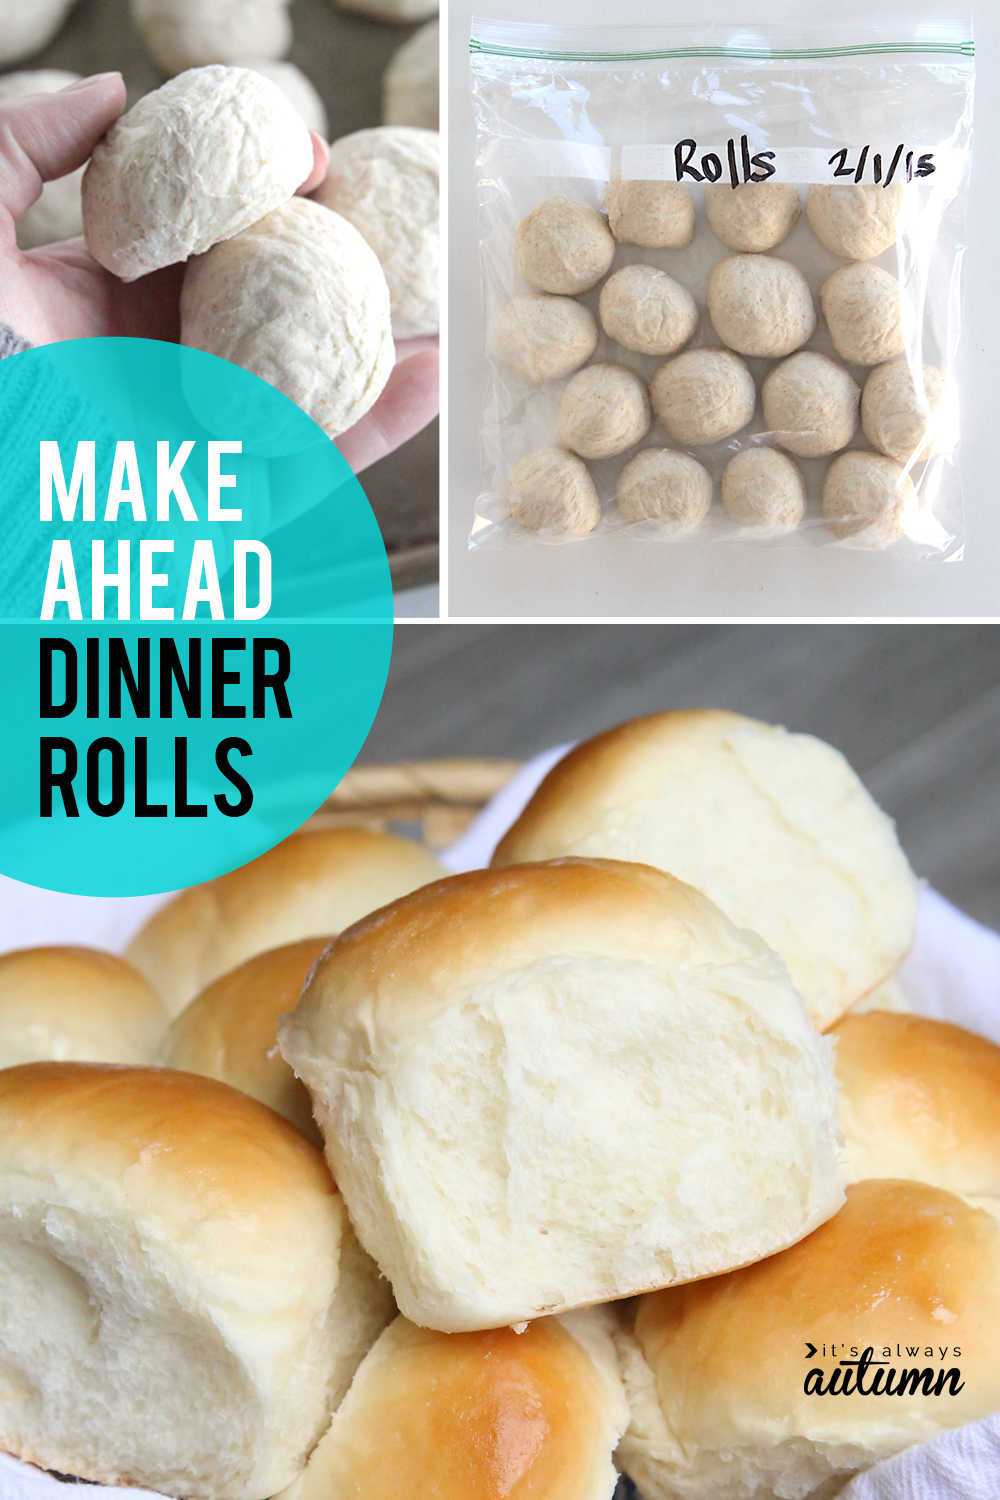 Make ahead dinner rolls recipe! How to make roll dough in advance and freeze it to bake later. Perfect for holiday dinners!